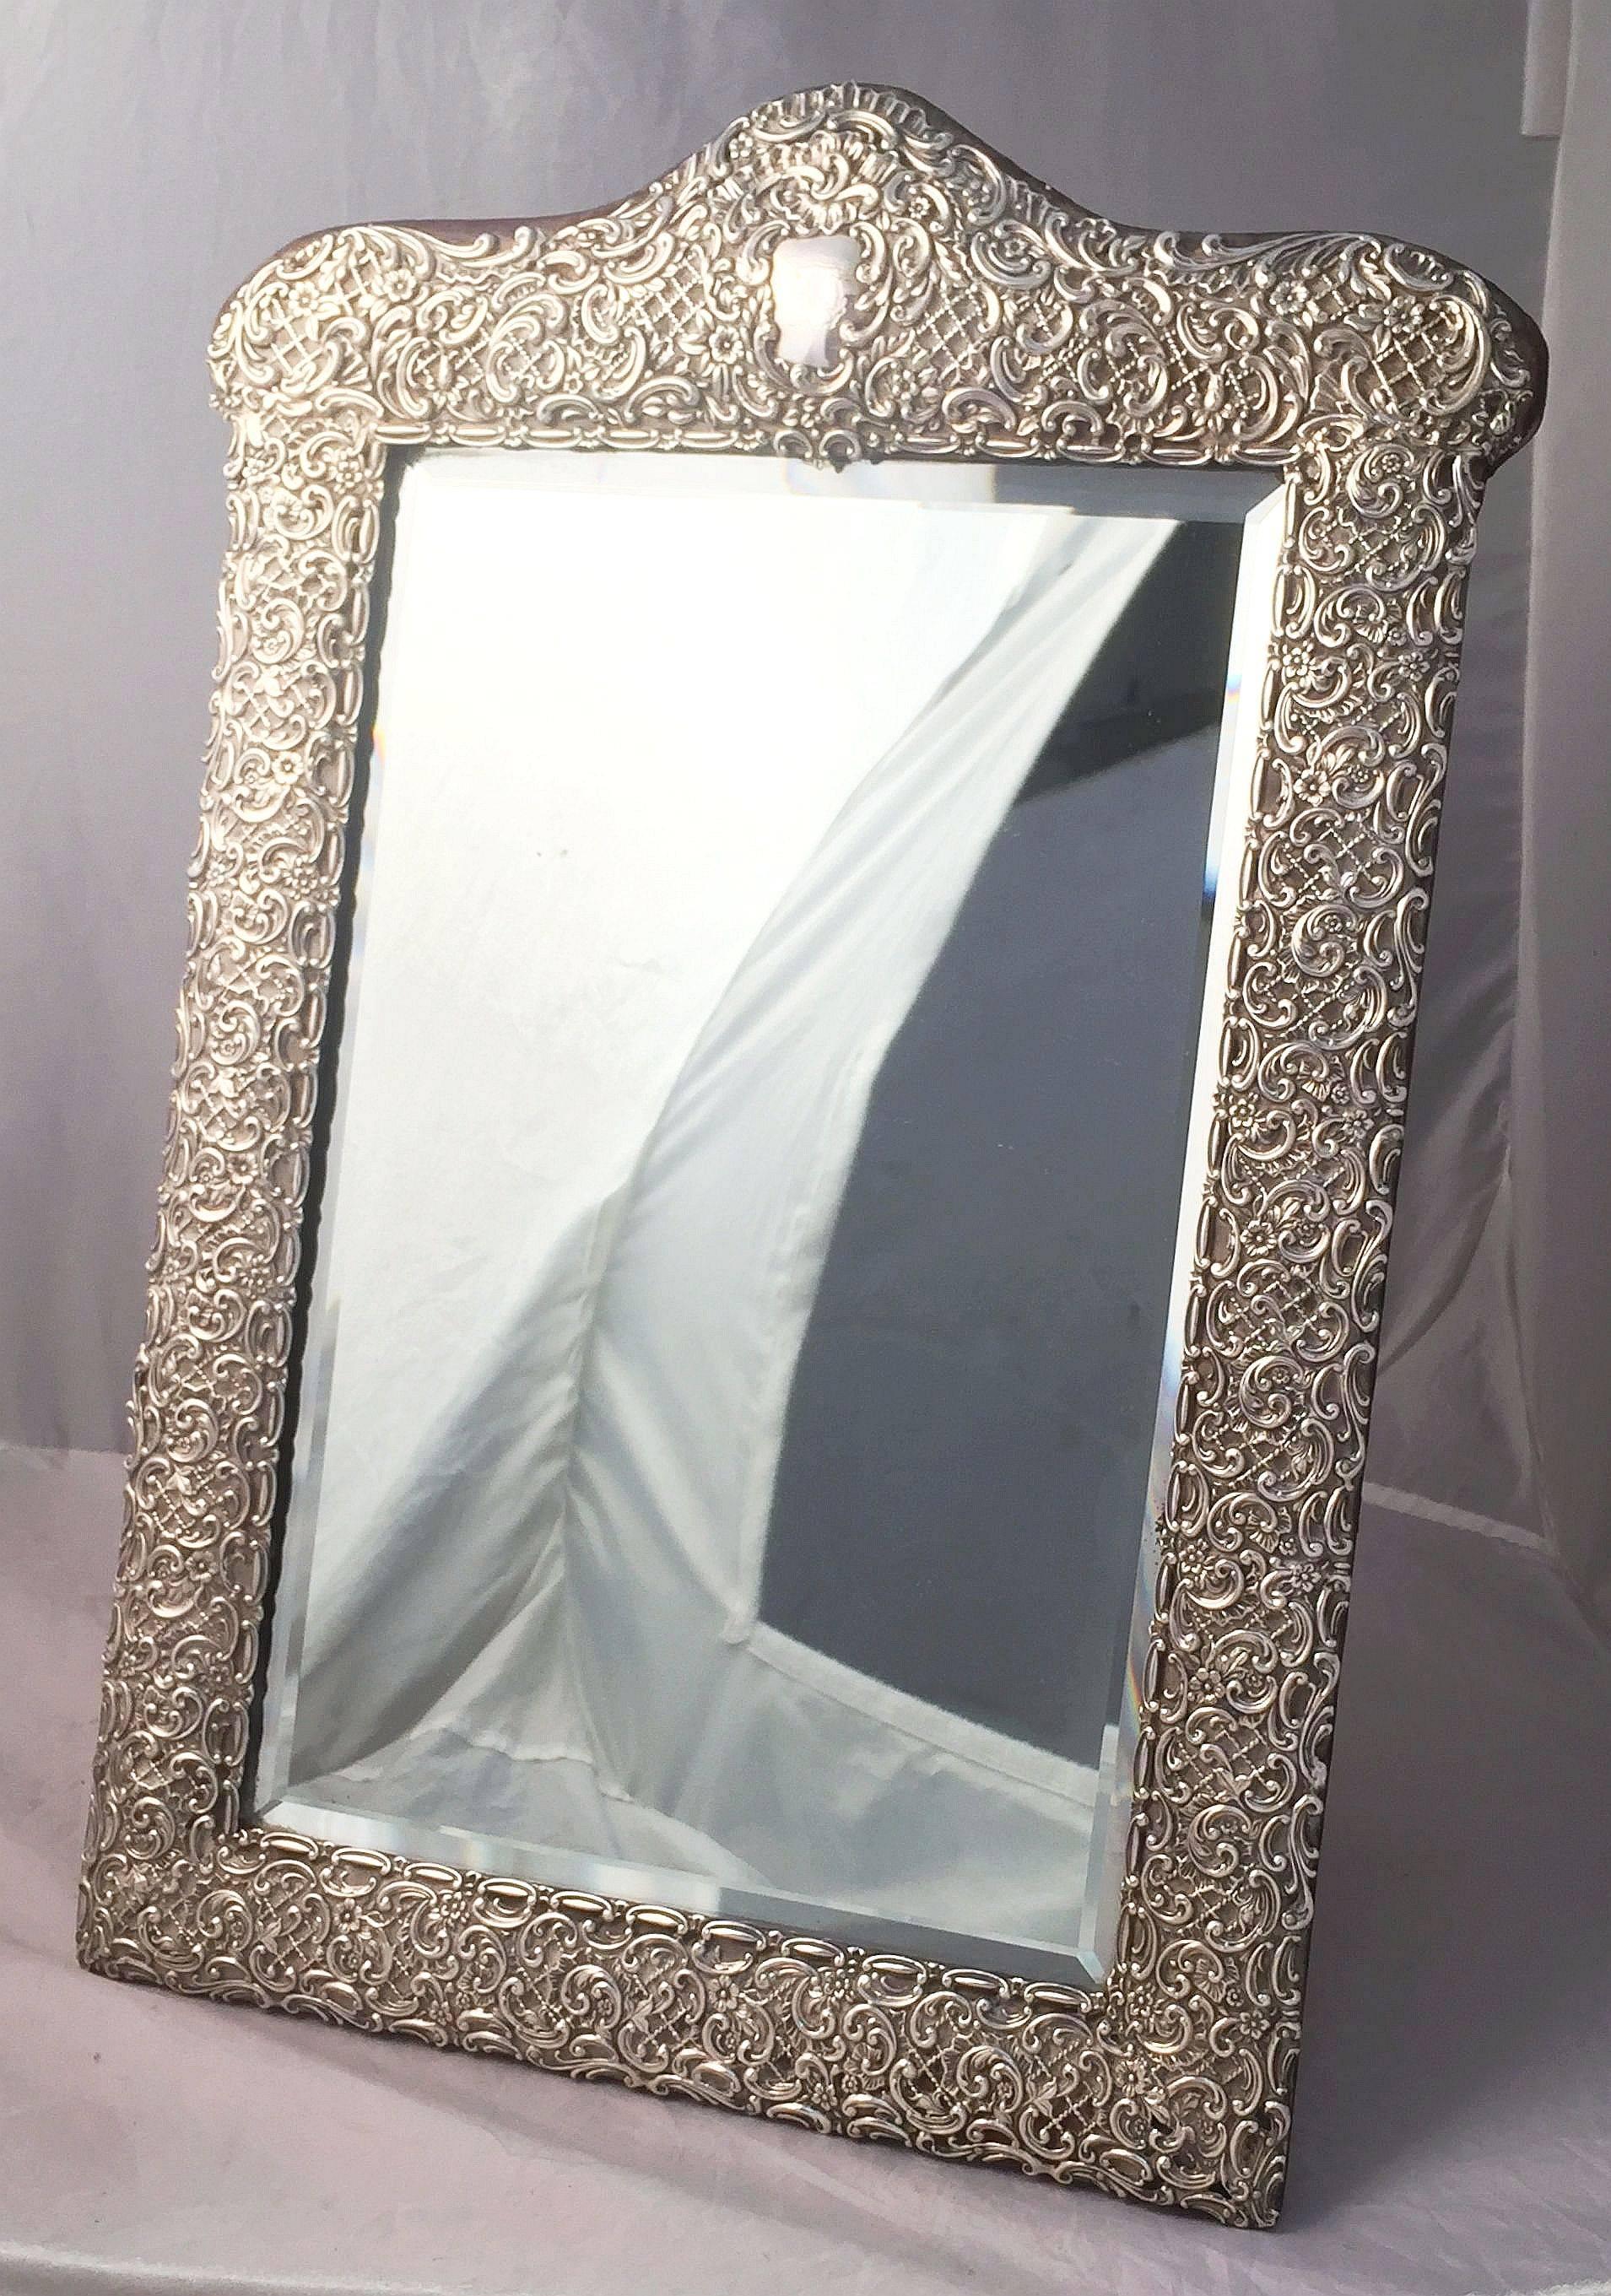 A fine English vanity or tabletop mirror of Sterling silver, featuring a chased Rococo scroll relief design to the frame, enclosing a rectangular beveled mirror, back of felt covered wood with folding Stand.

Hallmarks for Birmingham, circa